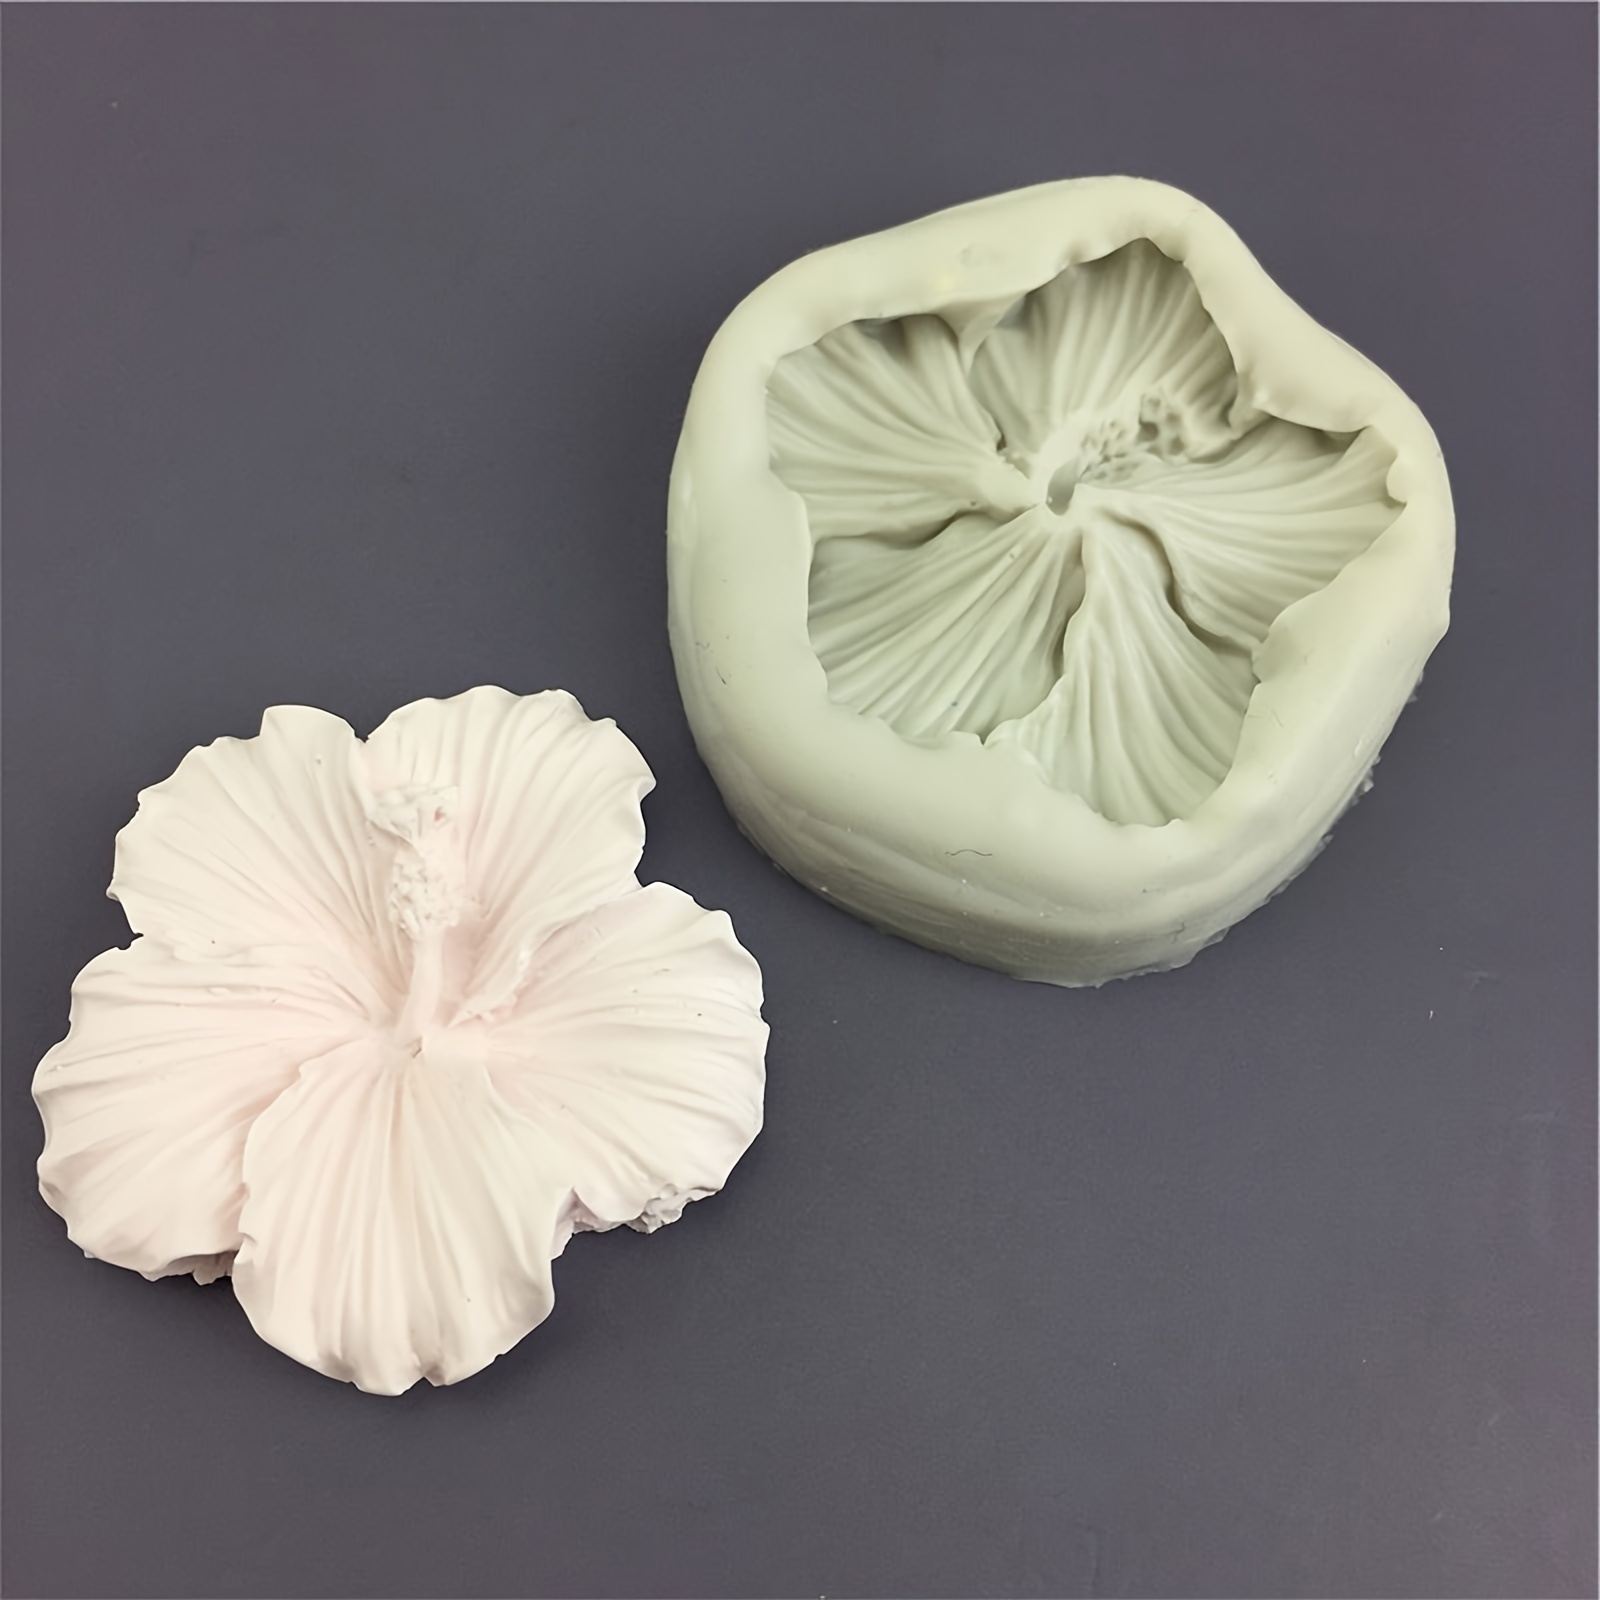 

1pc Hibiscus Shaped Silicone Mold Diy Chocolate Cake Baking Mold For Kitchen Baking Plaster Ornament Making Silicone Mold